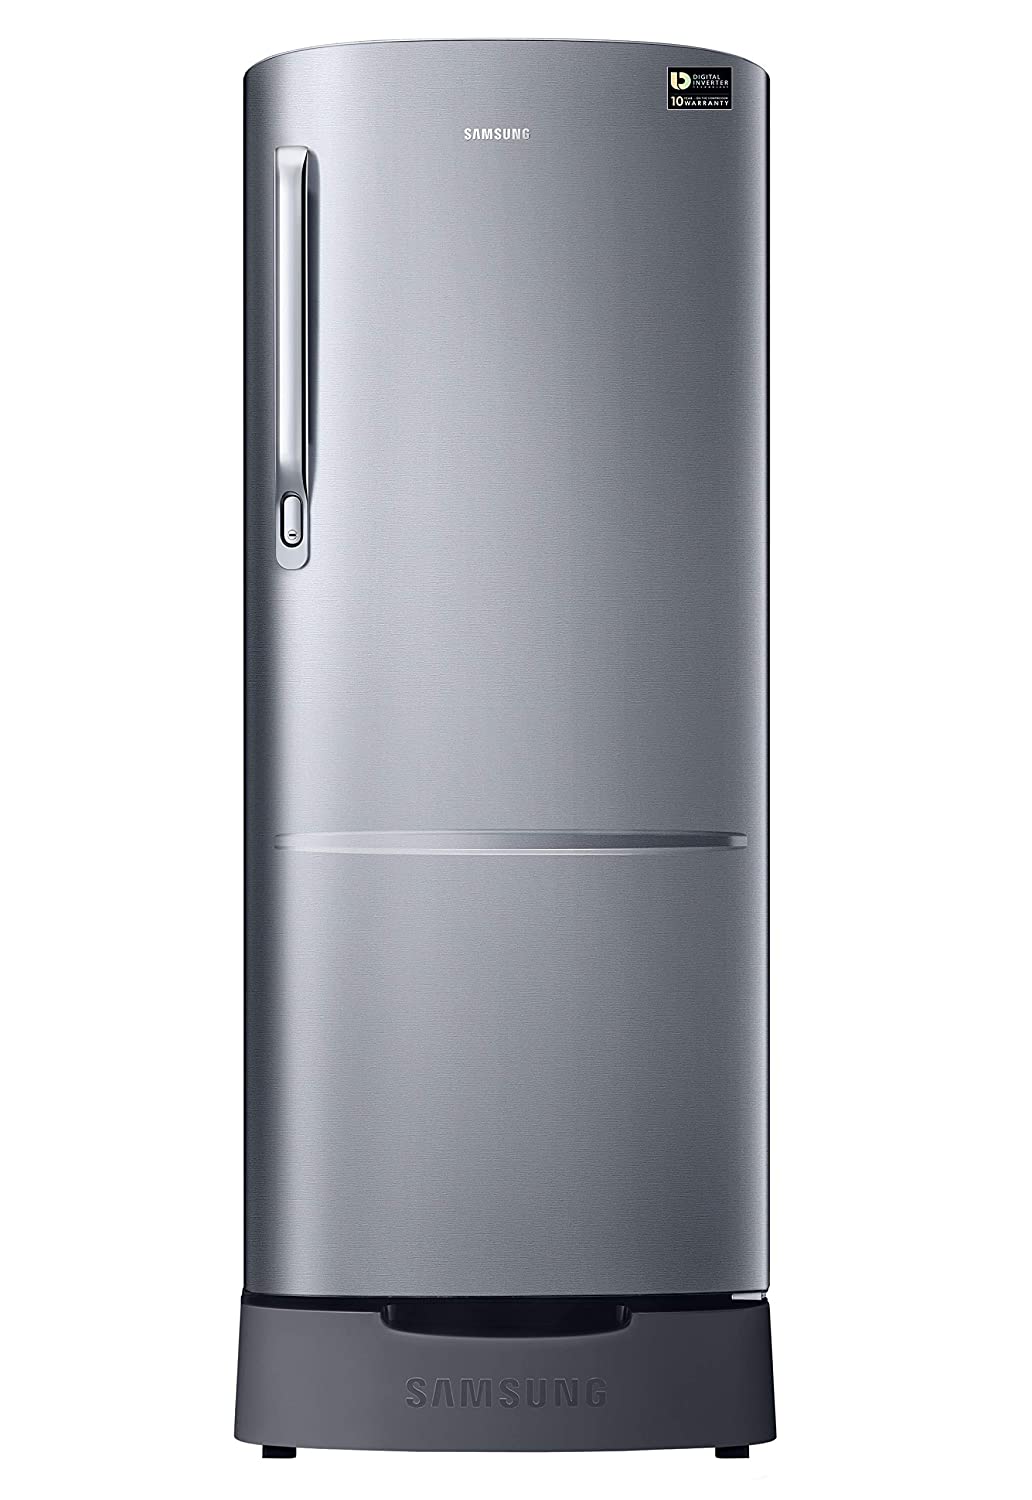 Samsung 230 L 3 Star Inverter Direct Cool Single Door Refrigerator (RR24A282YS8/NL, Base Stand with Drawer, Elegant Inox), Silver